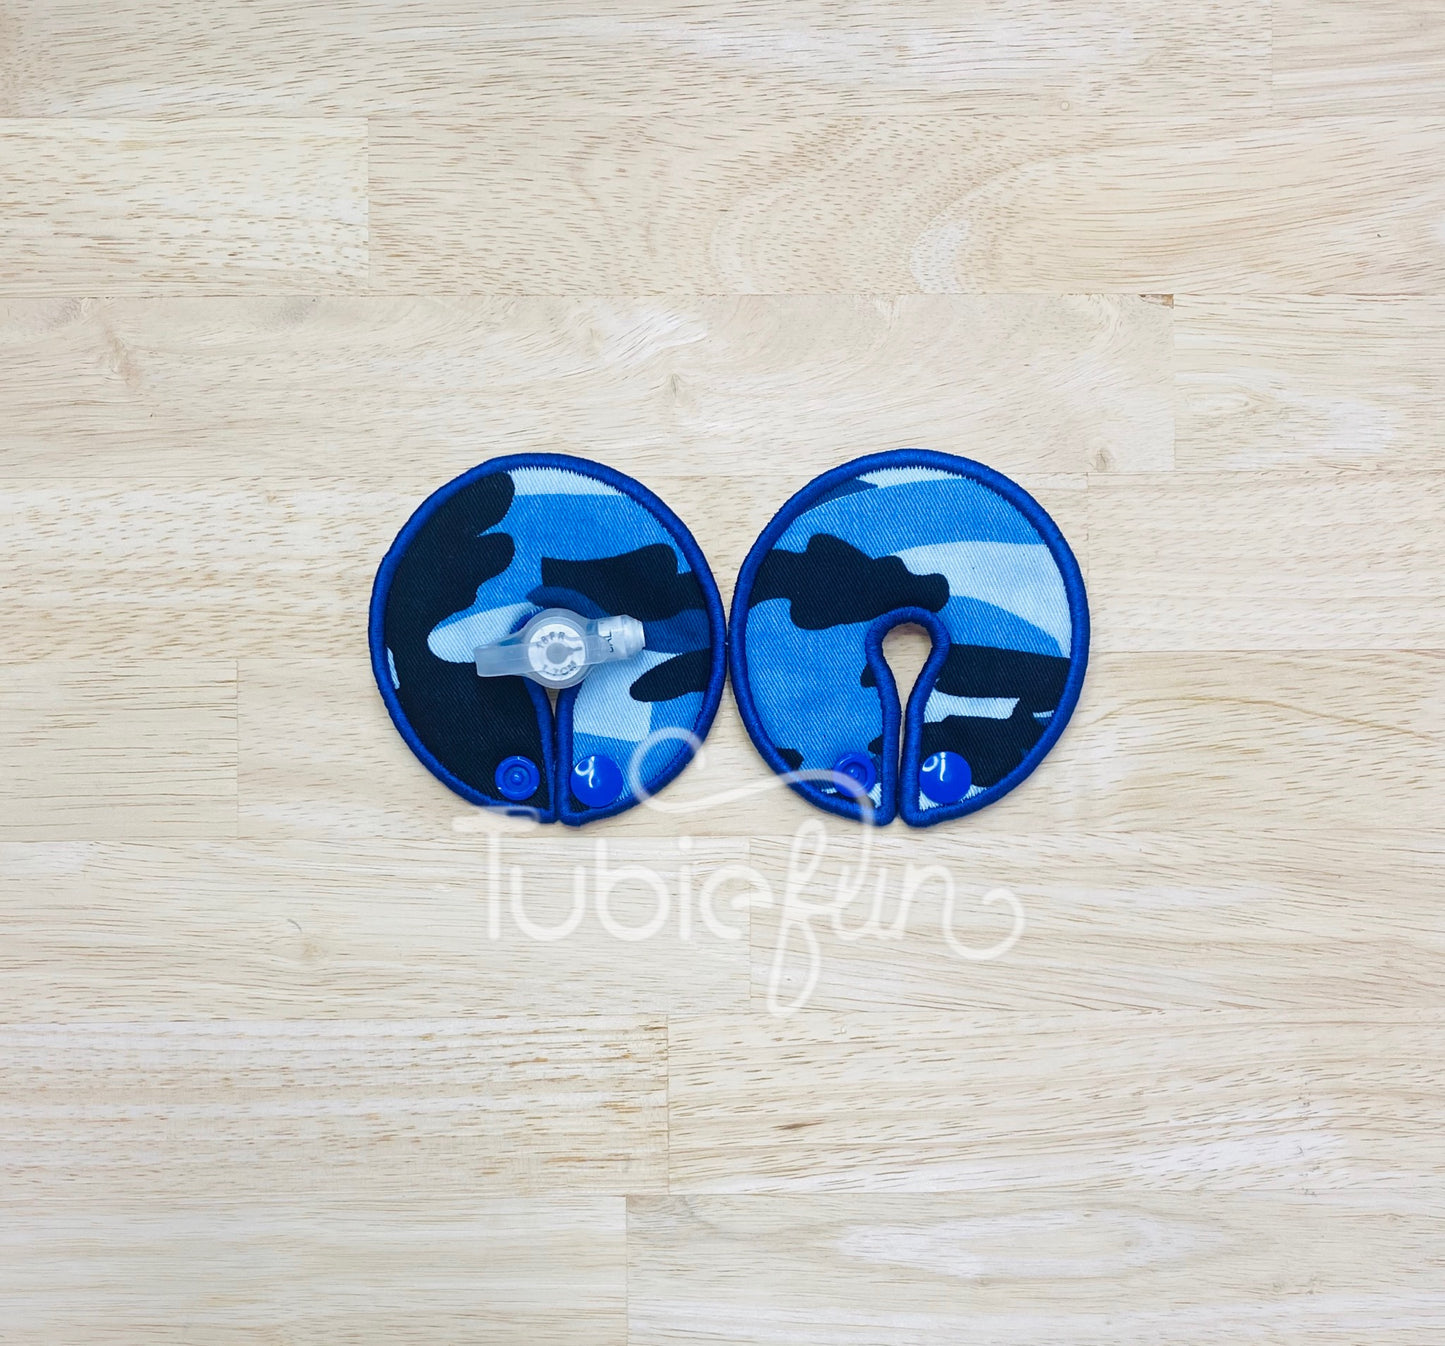 G-Tube Button Pad Cover Large - Blue Camo